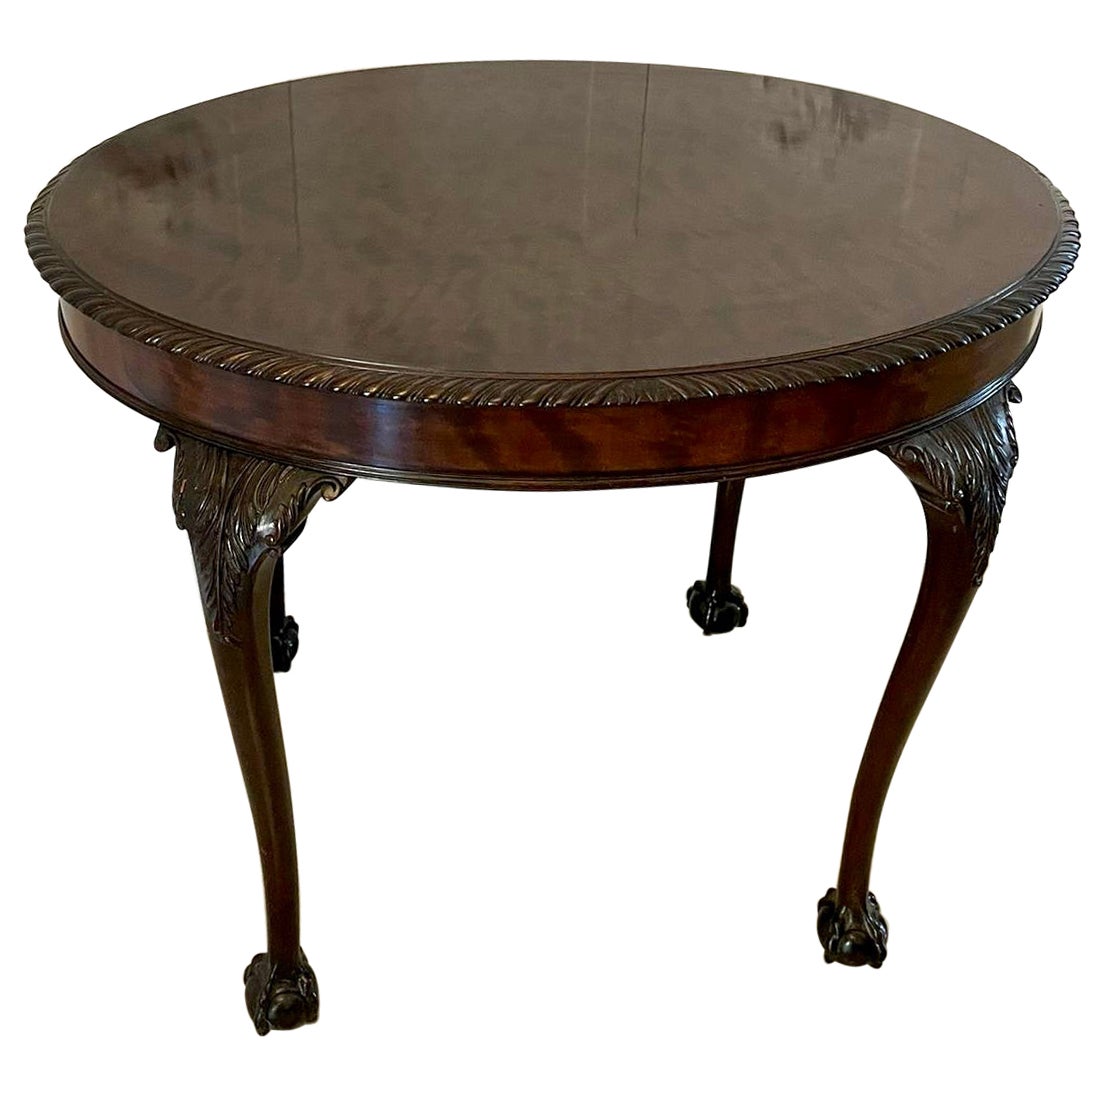 Antique Quality Oval Carved Mahogany Centre Table